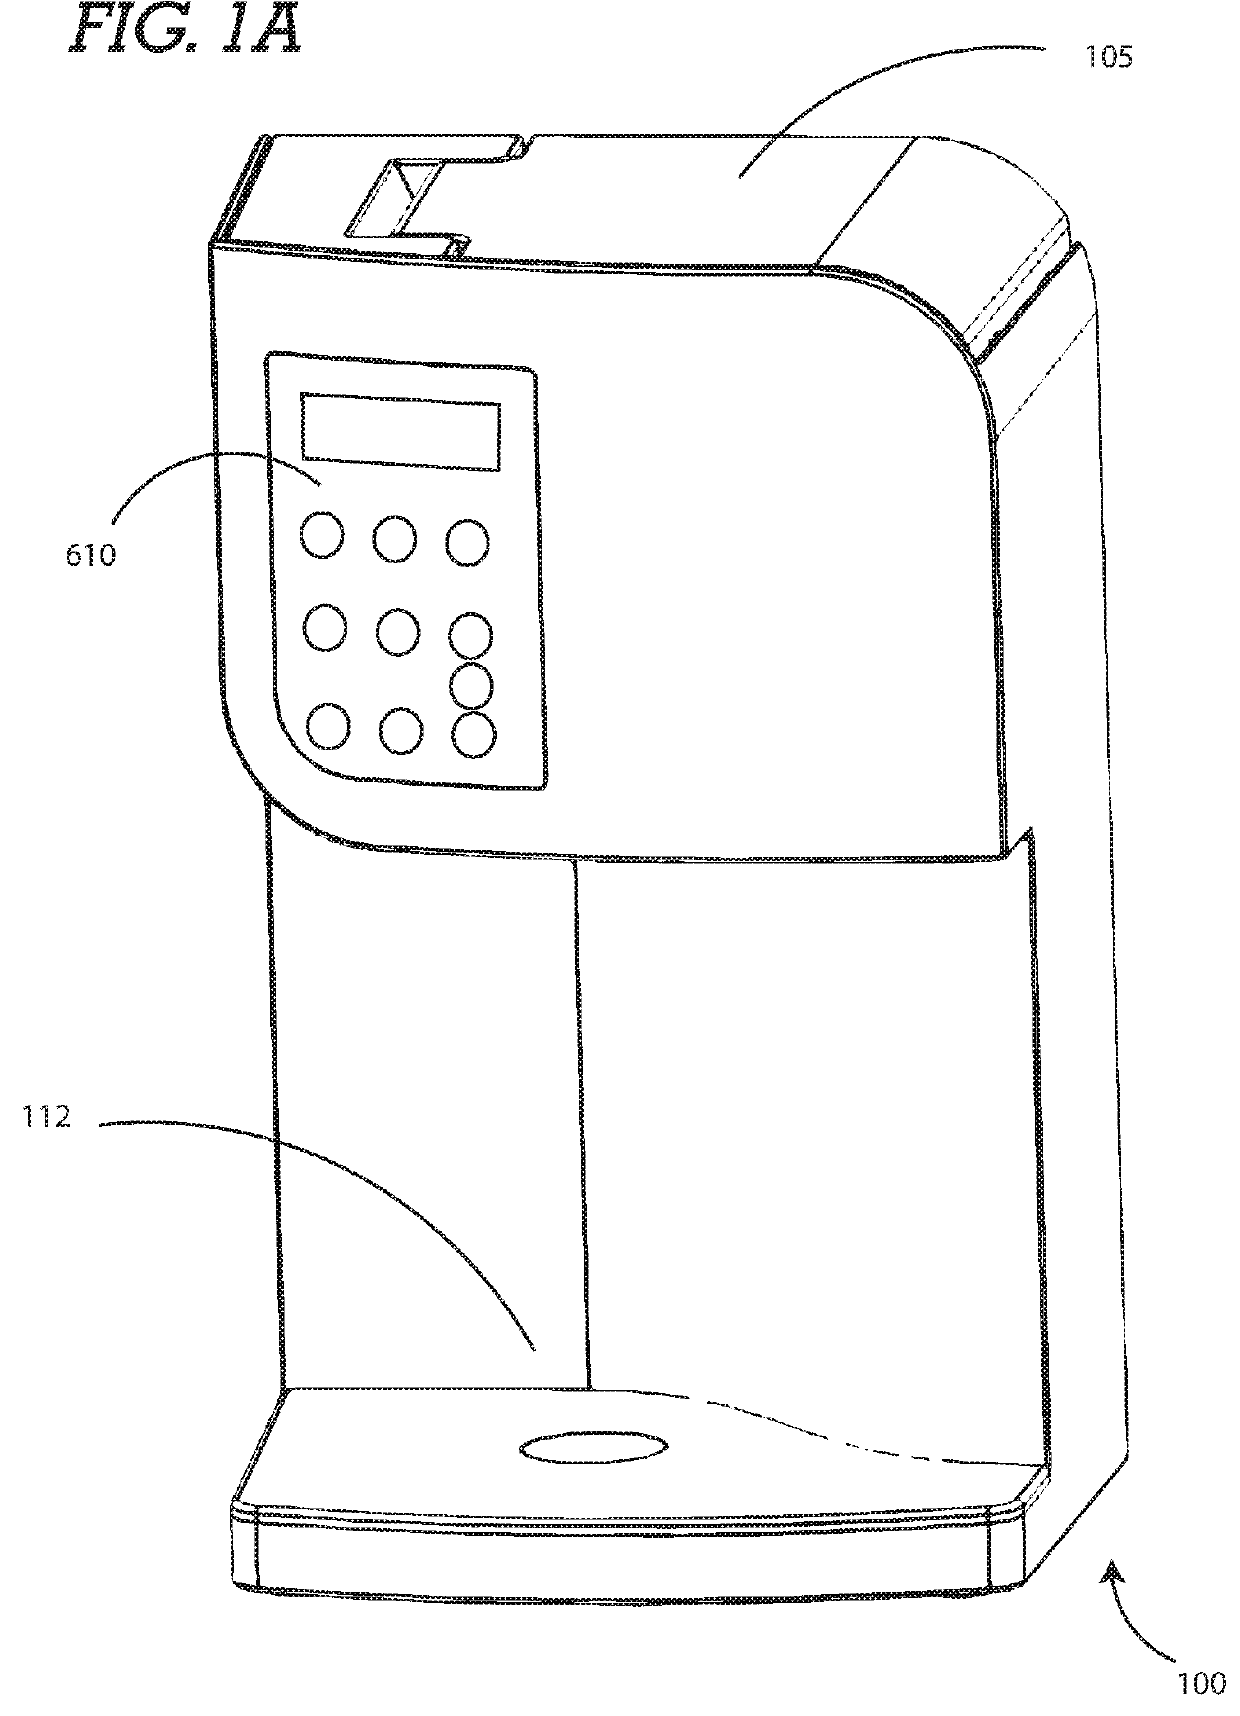 Apparatus and method for infusing and dispensing oils